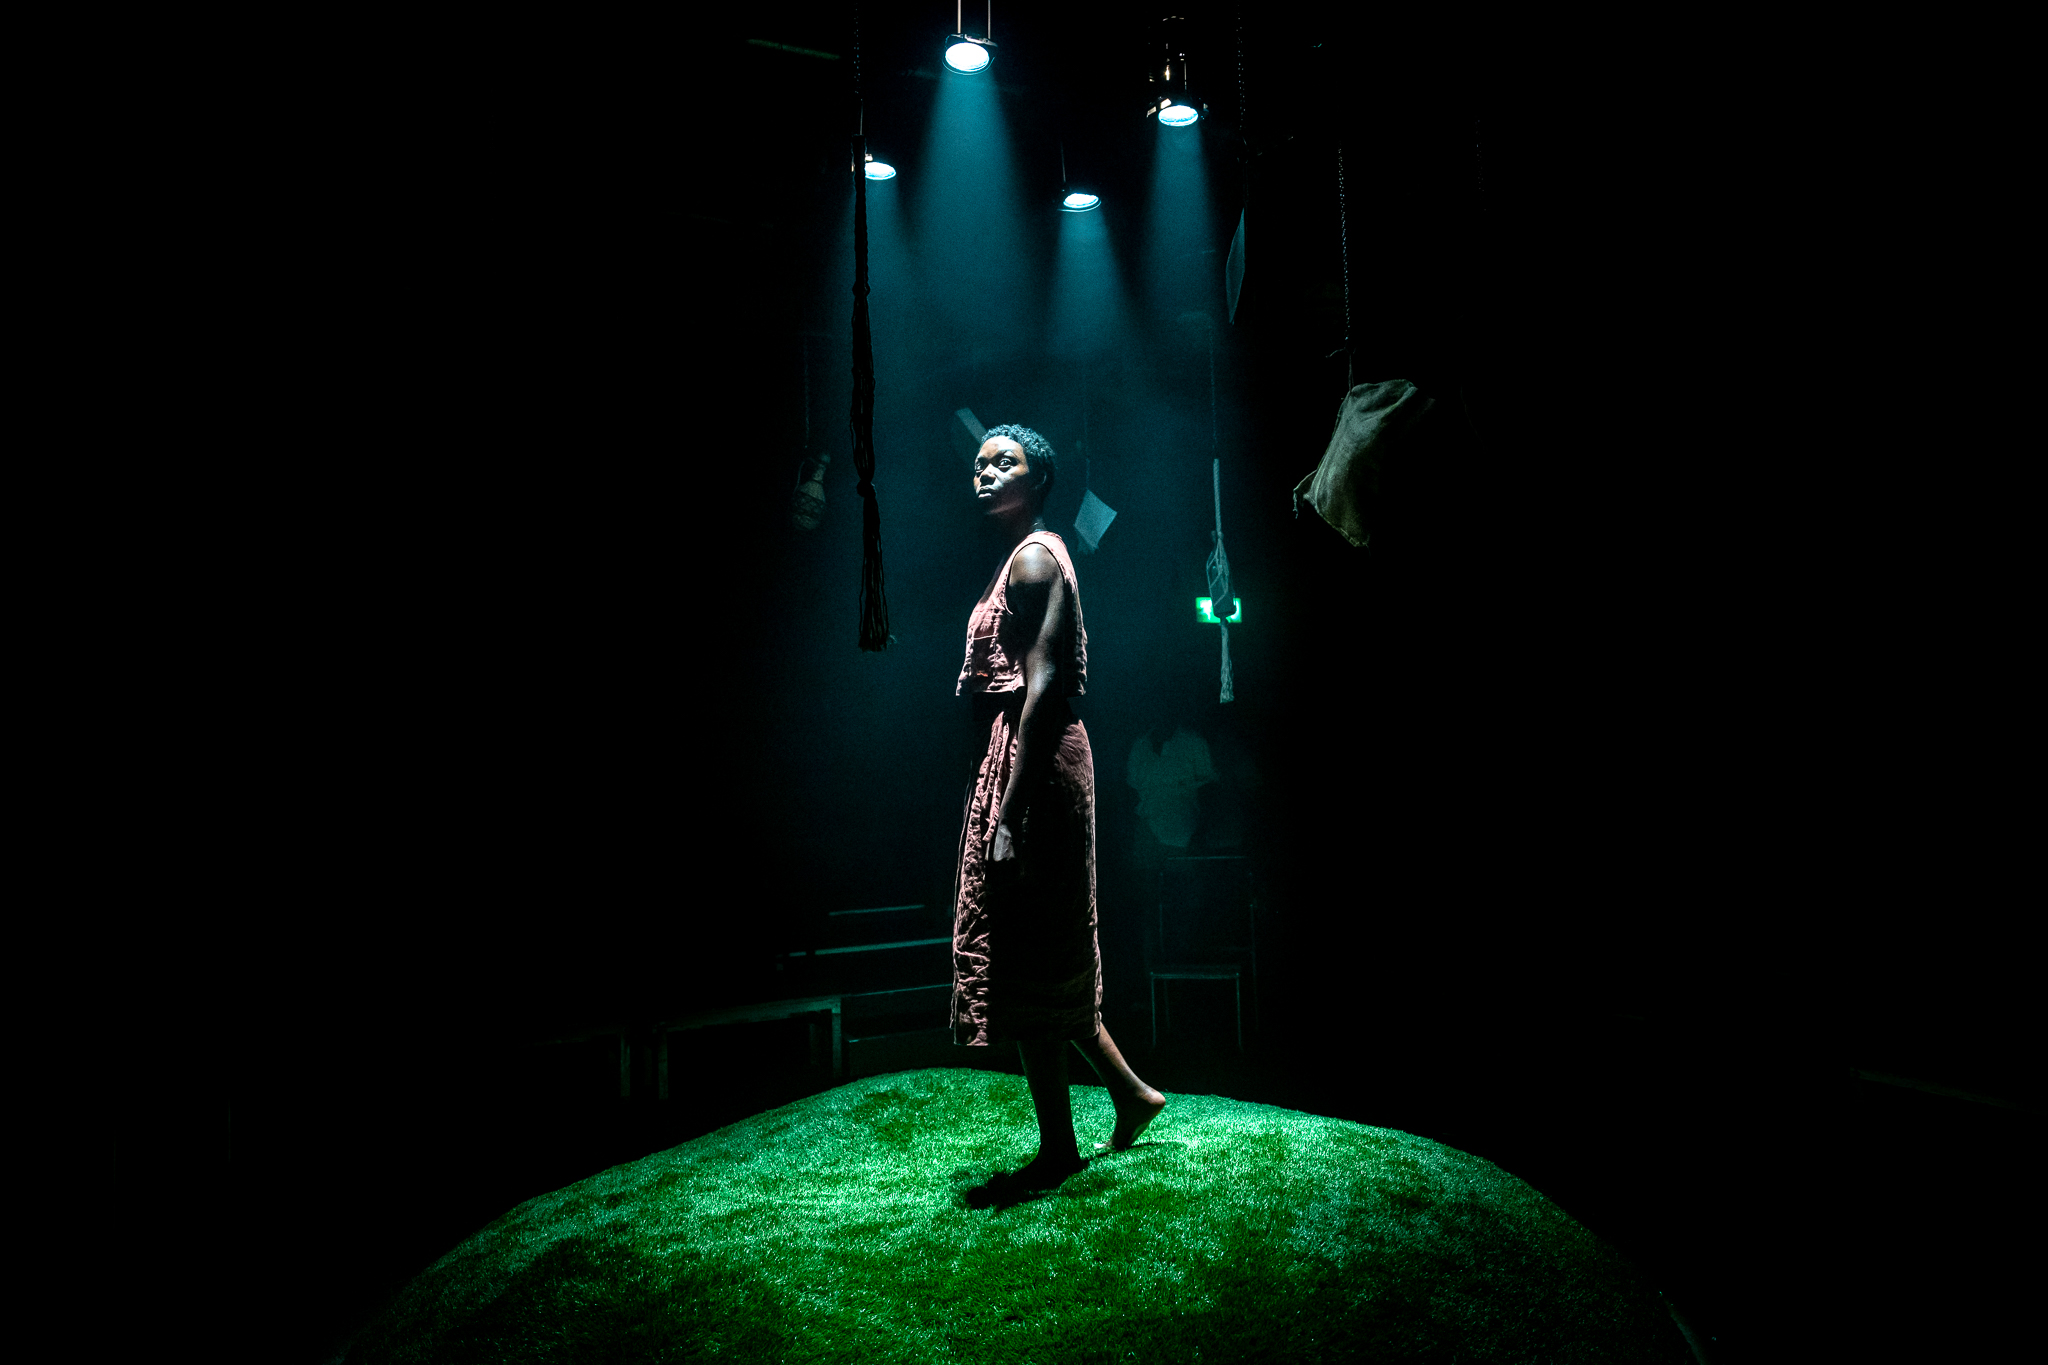 ‘Under The Kunde Tree’ is spotlighting the forgotten role of women in Cameroon’s War for freedom through theatre